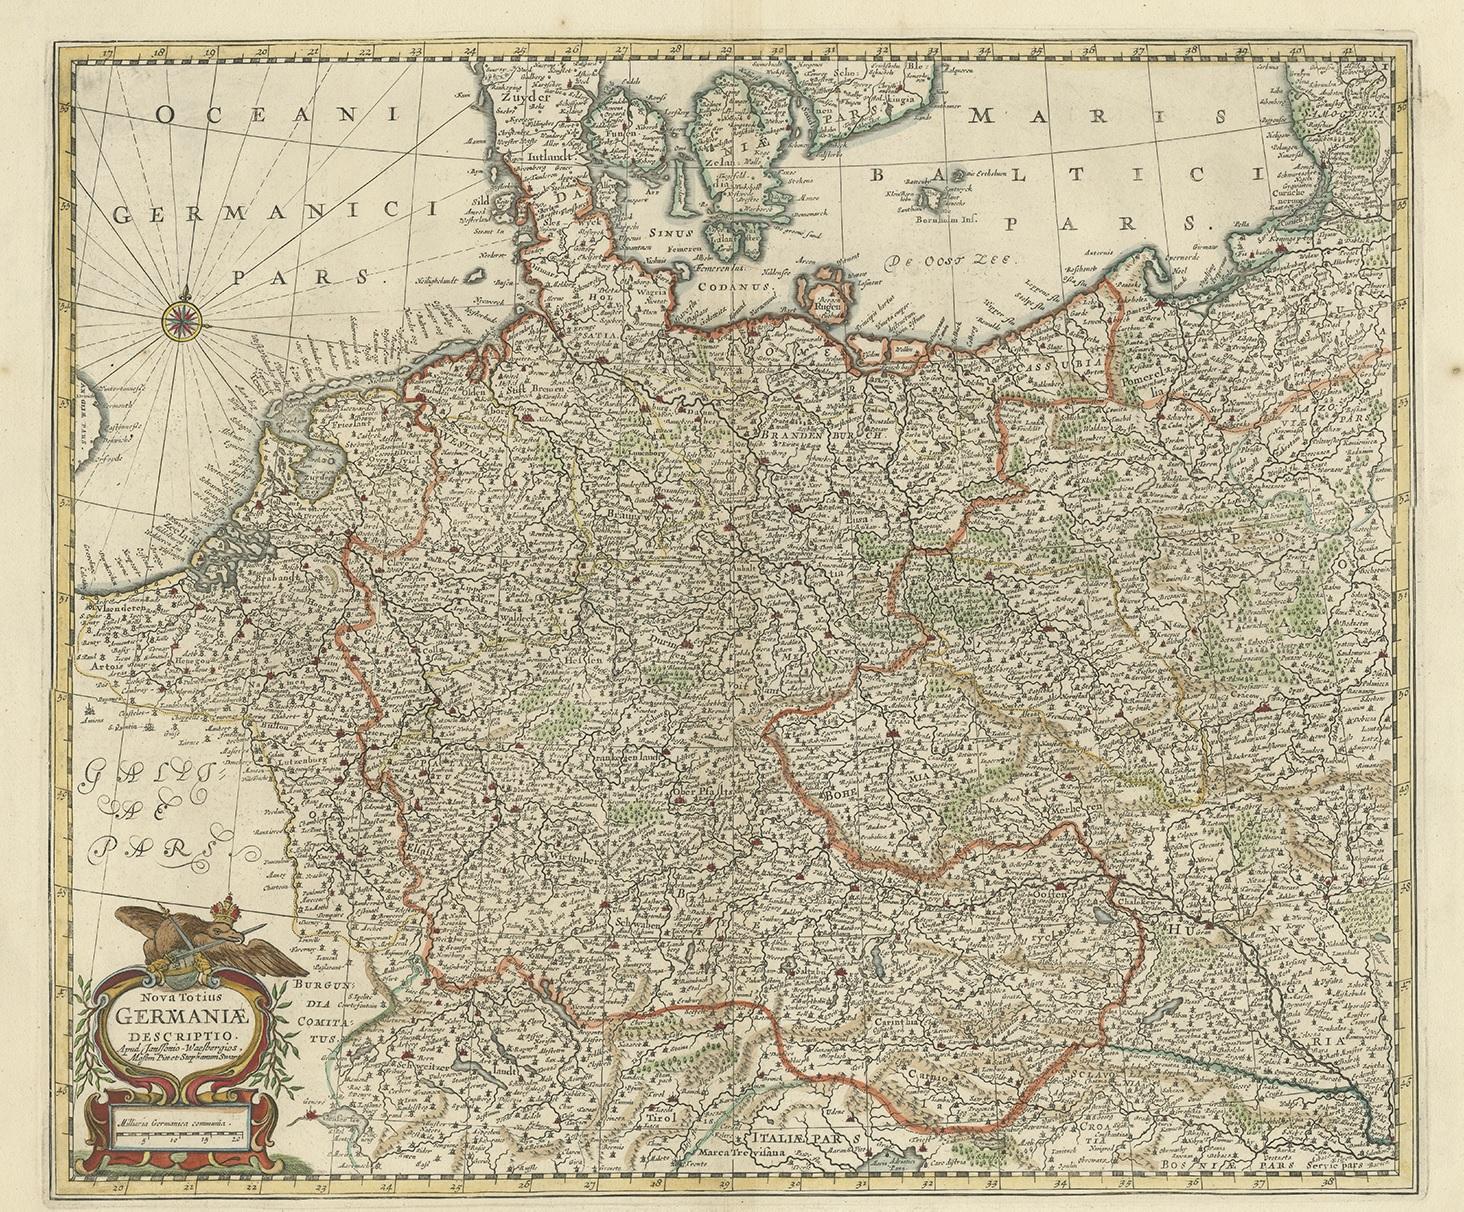 Antique map titled 'Nova Totius Germaniae Descriptio'. Uncommon map of the German Empire including the Netherlands, Germany, Switzerland, Austria, Bohemia, Moravia, Poland and the Baltic Countries.